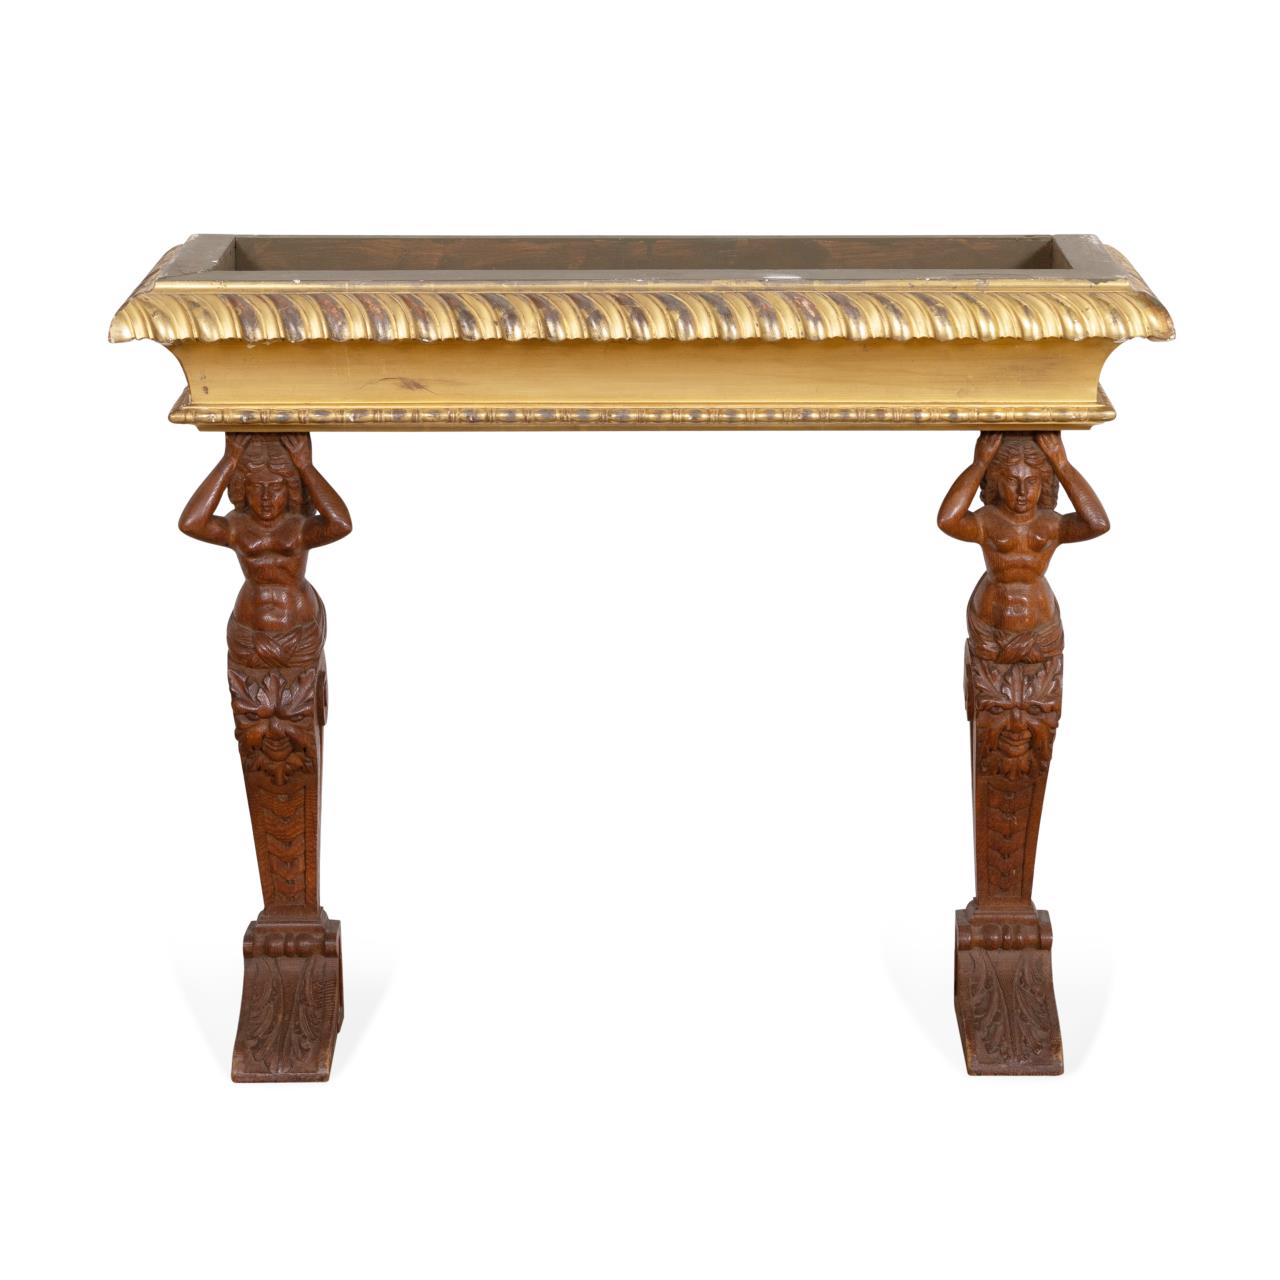 ITALIAN MARBLE TOP CARYATID CONSOLE 2bfd0f